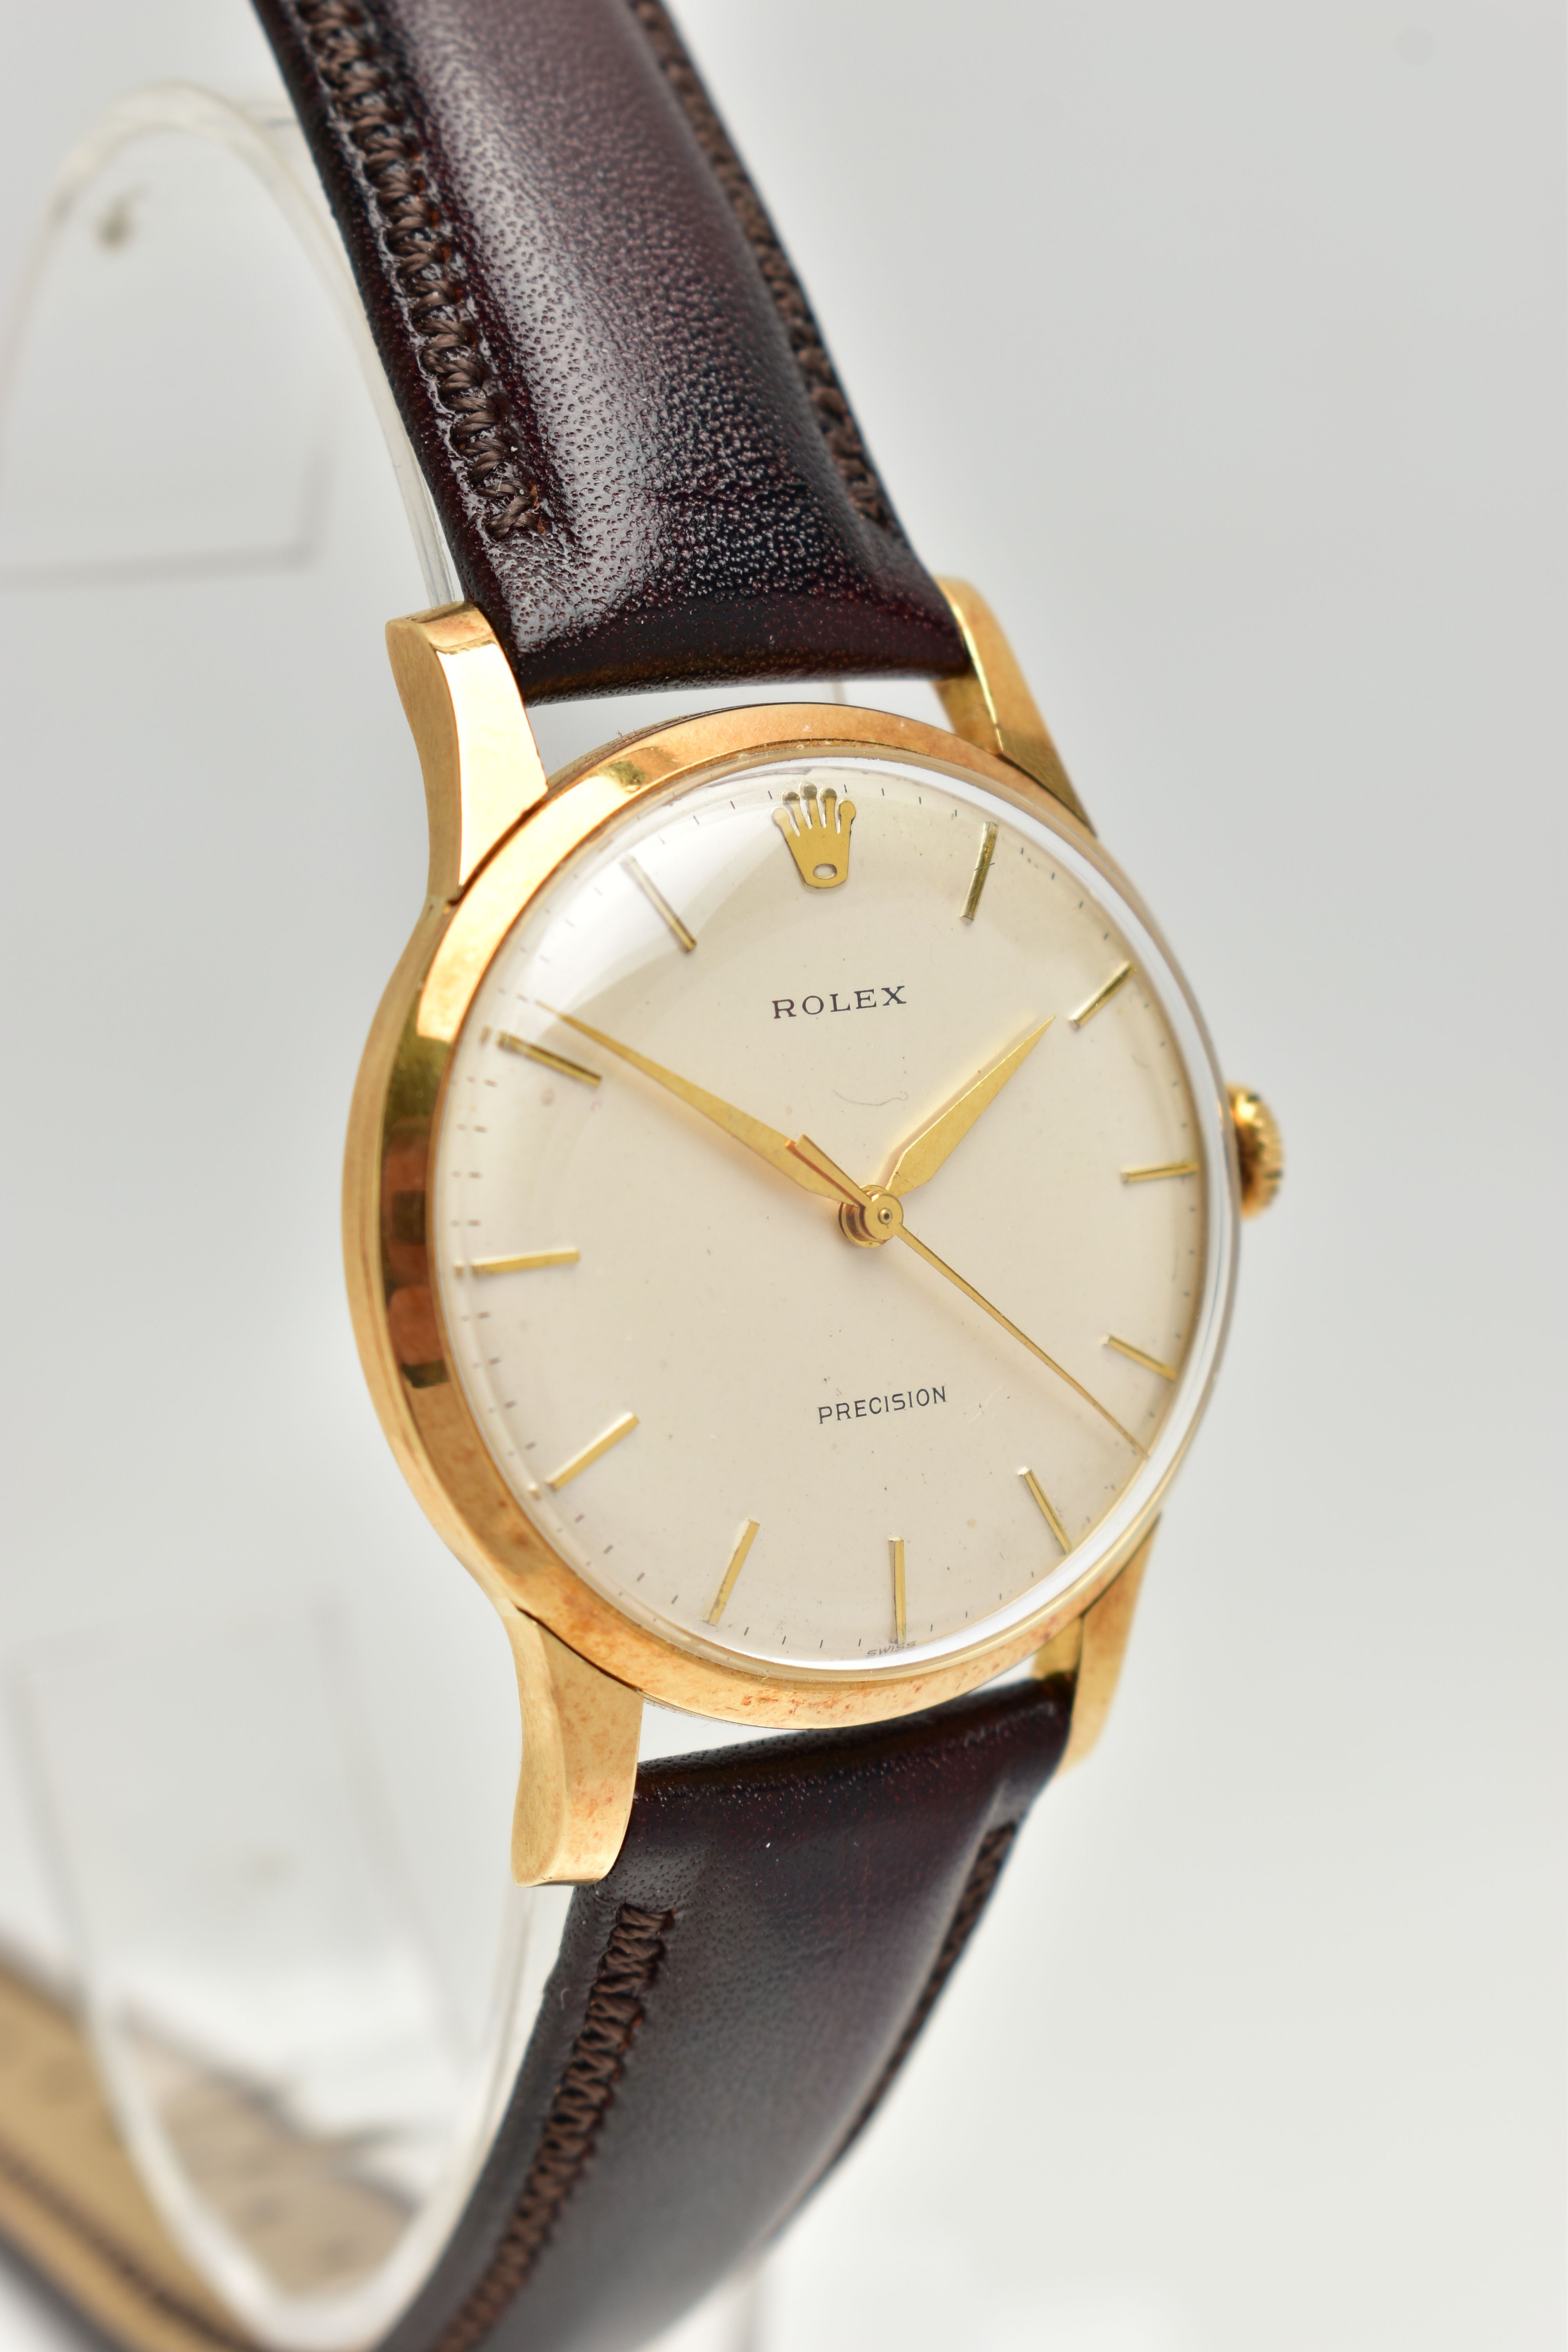 AN 18CT GOLD GENTS 'ROLEX, PRECISION' WRISTWATCH, hand wound movement, round dial, signed 'Rolex' - Image 2 of 7